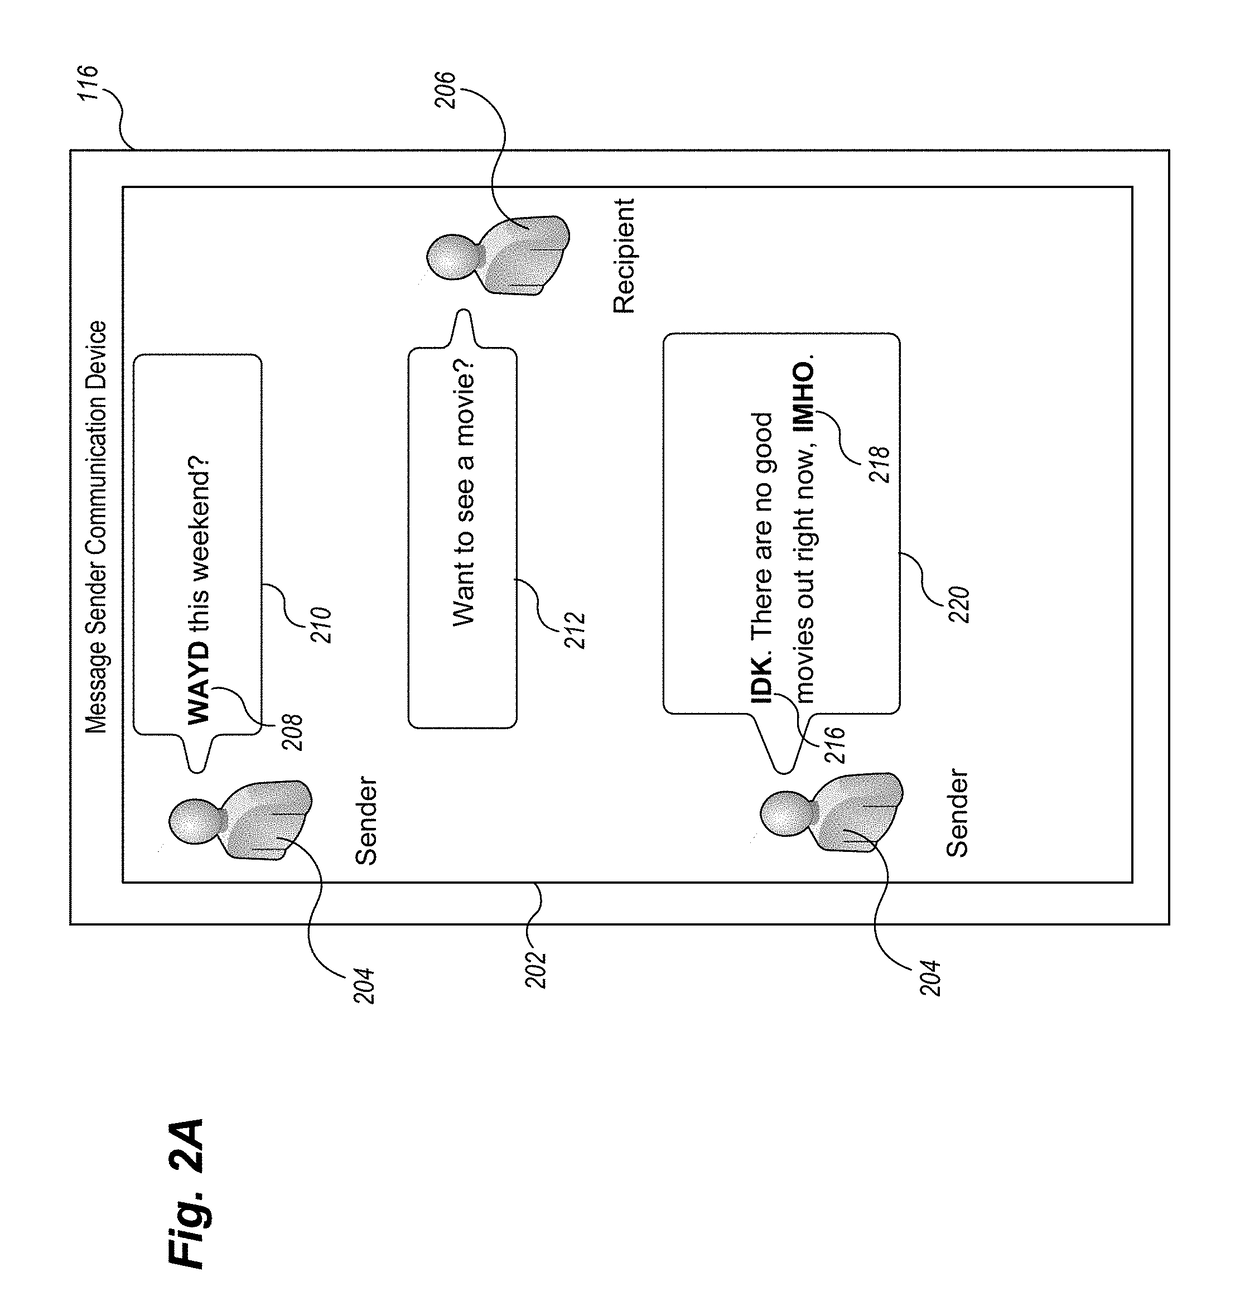 Systems and methods for processing shorthand items in electronic communications